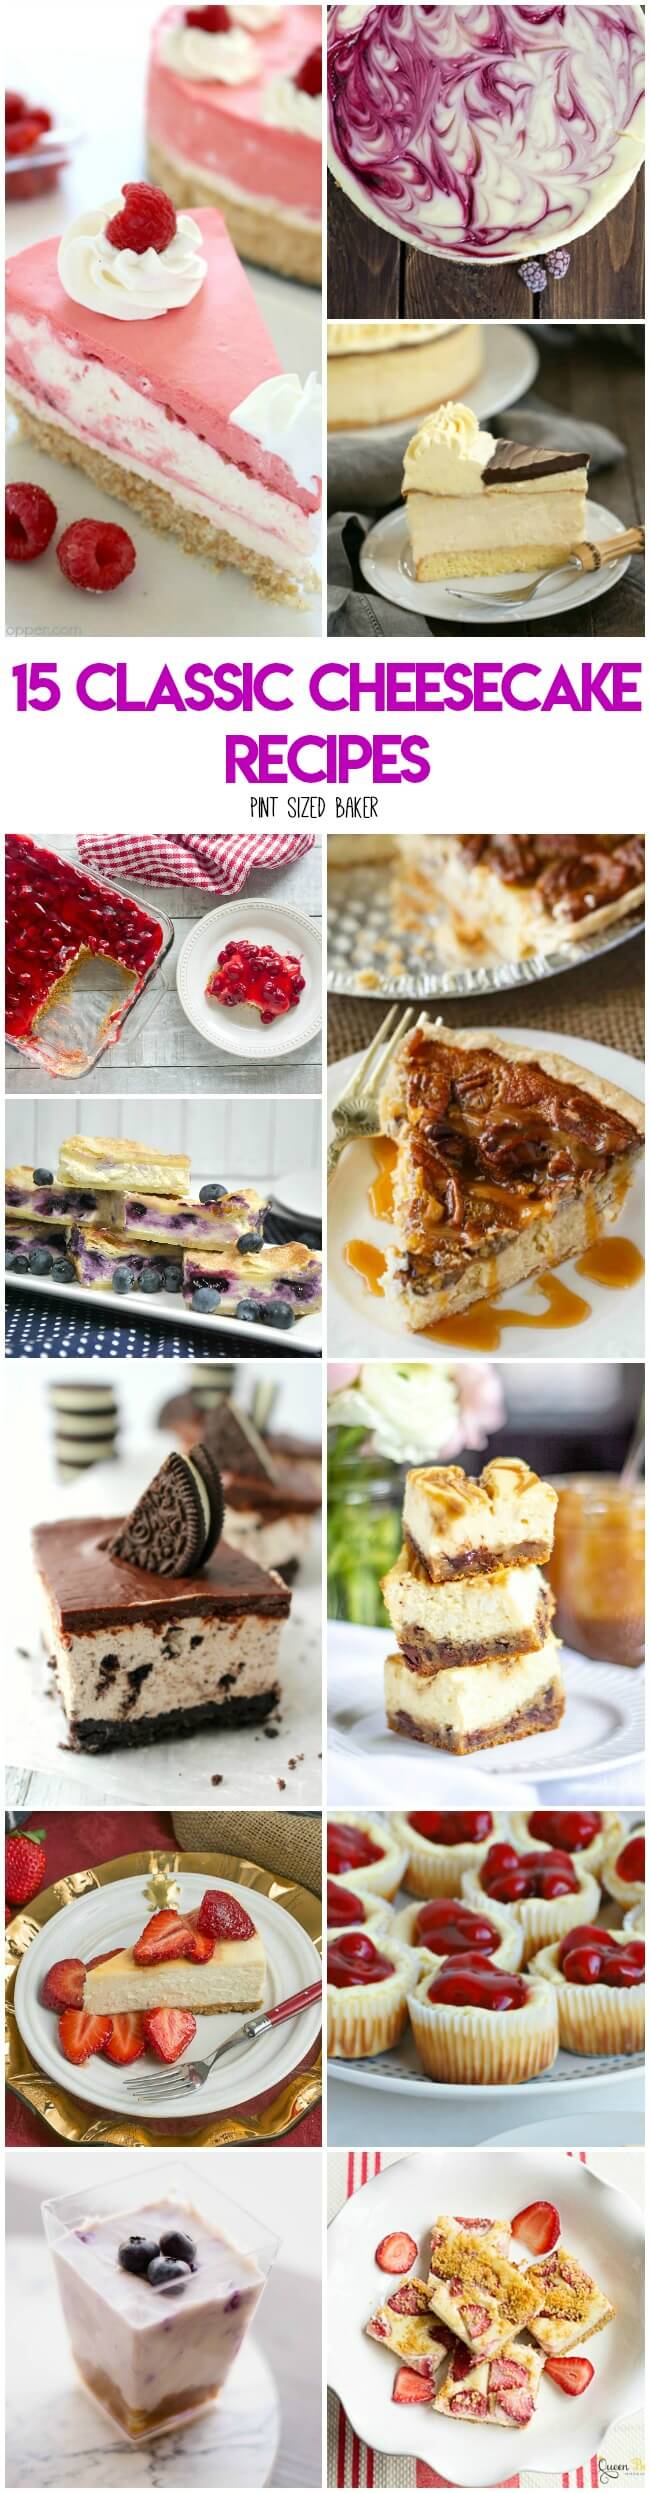  Here's 15 Classic Cheesecake Recipes to get you inspired to get into the kitchen and make your family a dessert they all love.